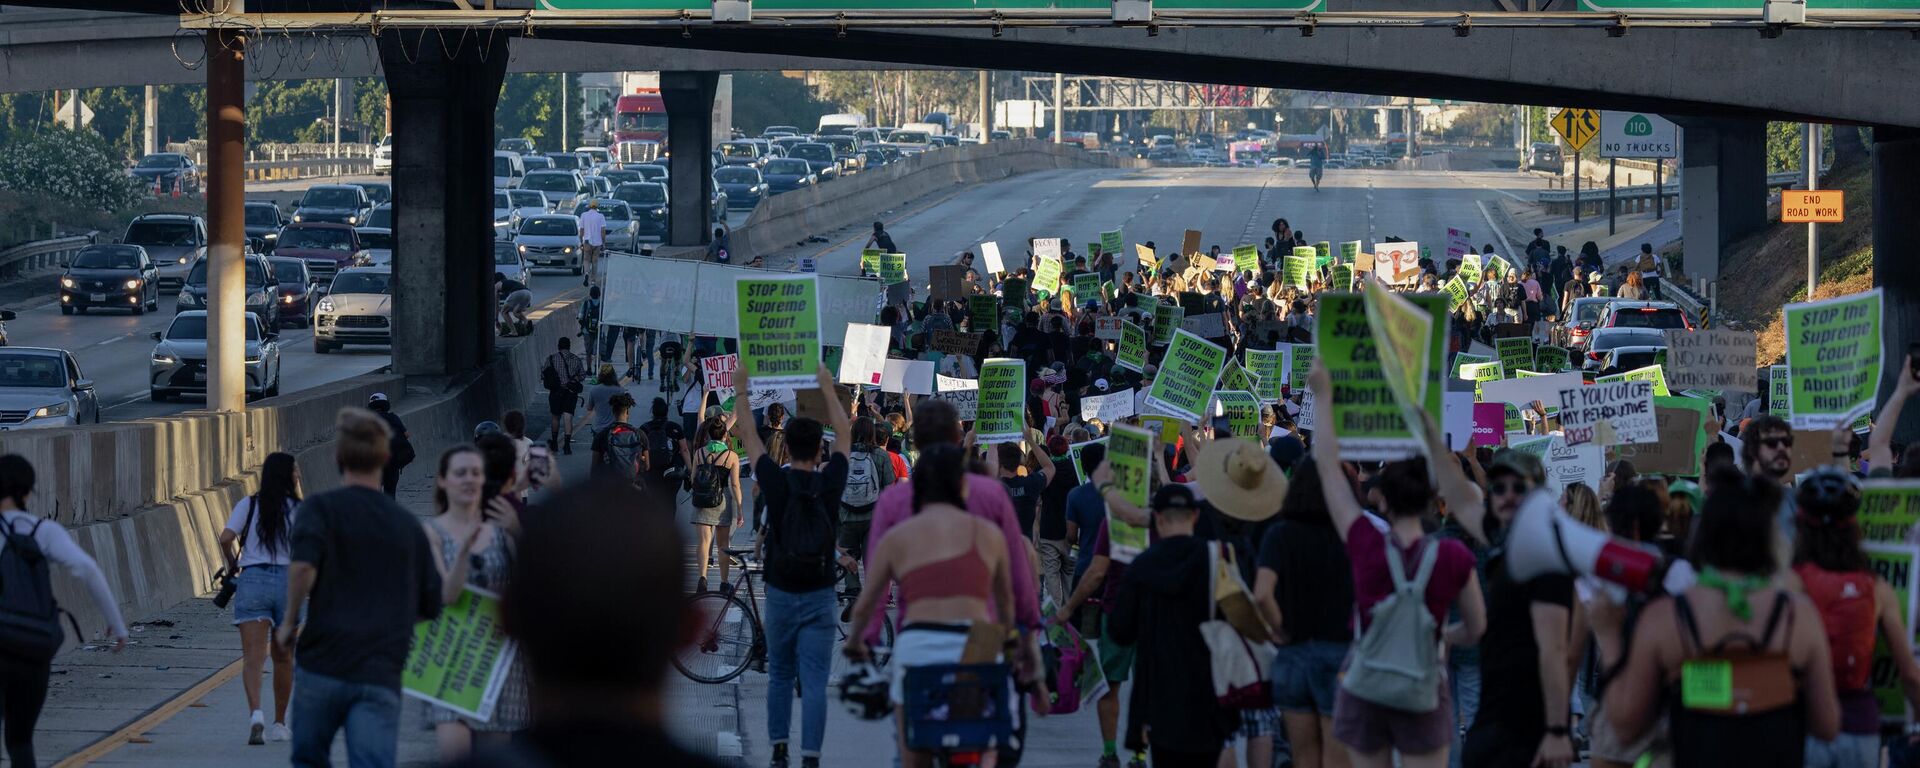 Protesters march northbound on the 110 Freeway to denounce the Supreme Court's decision in the Dobbs v Jackson Women's Health case on June 24, 2022 in Los Angeles, California.  - Sputnik International, 1920, 26.06.2022